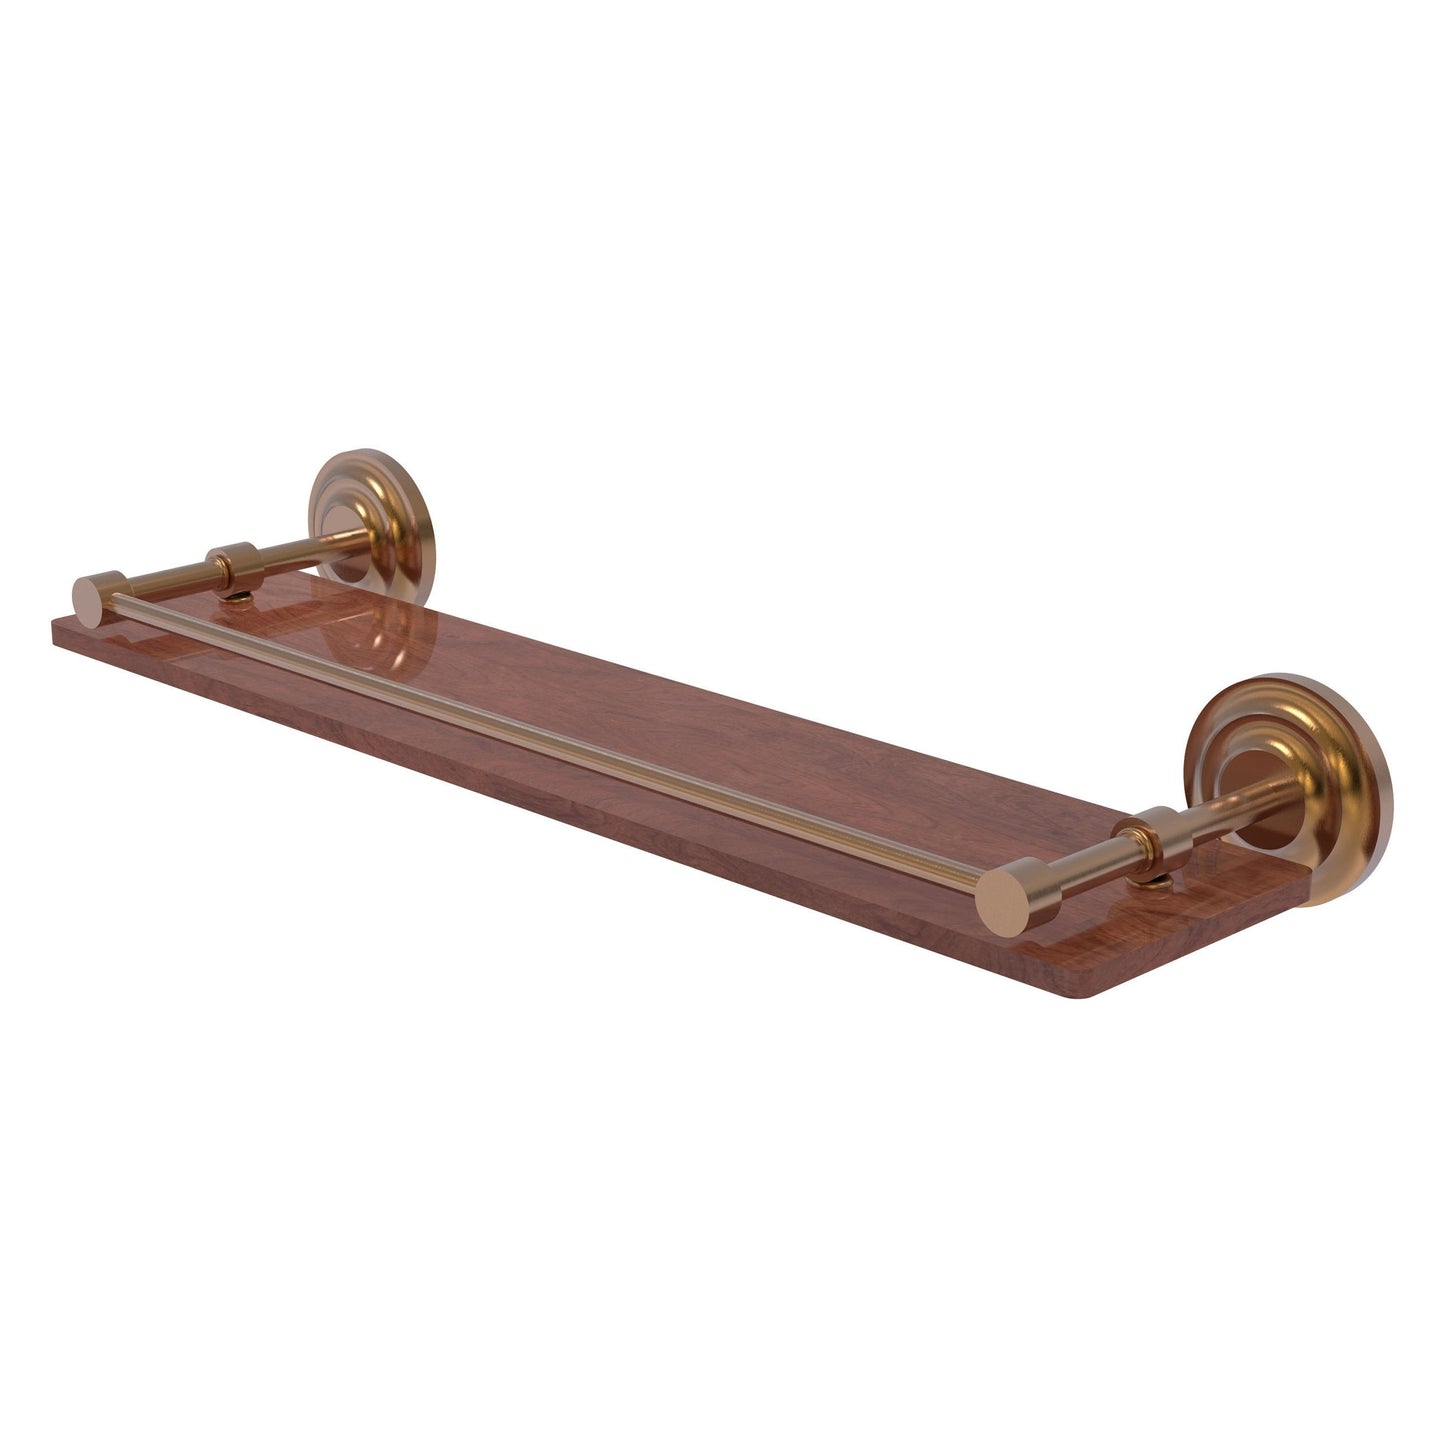 Allied Brass Que New 22" x 5" Brushed Bronze Solid Brass 22-Inch Solid IPE Ironwood Shelf With Gallery Rail